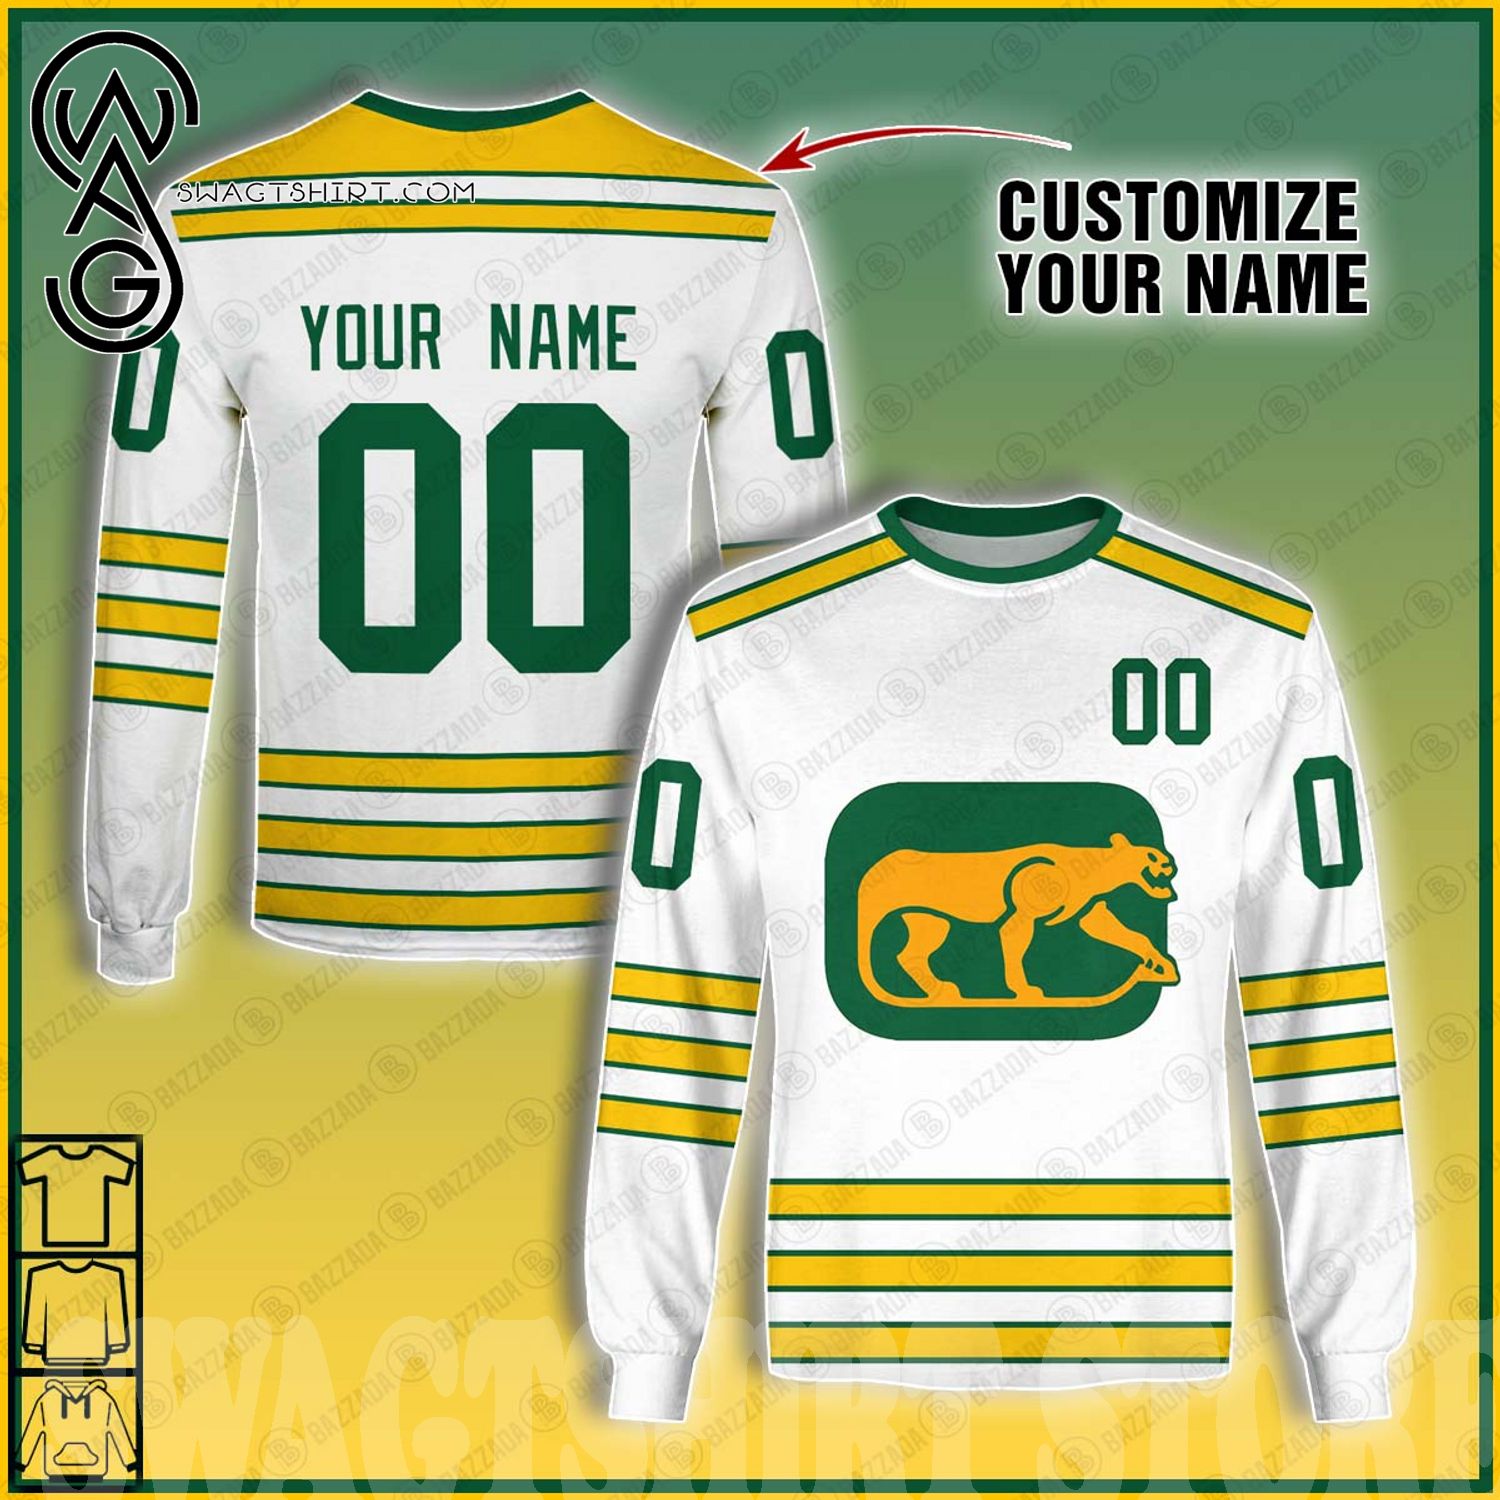 WHA Chicago Cougars vintage hockey jersey